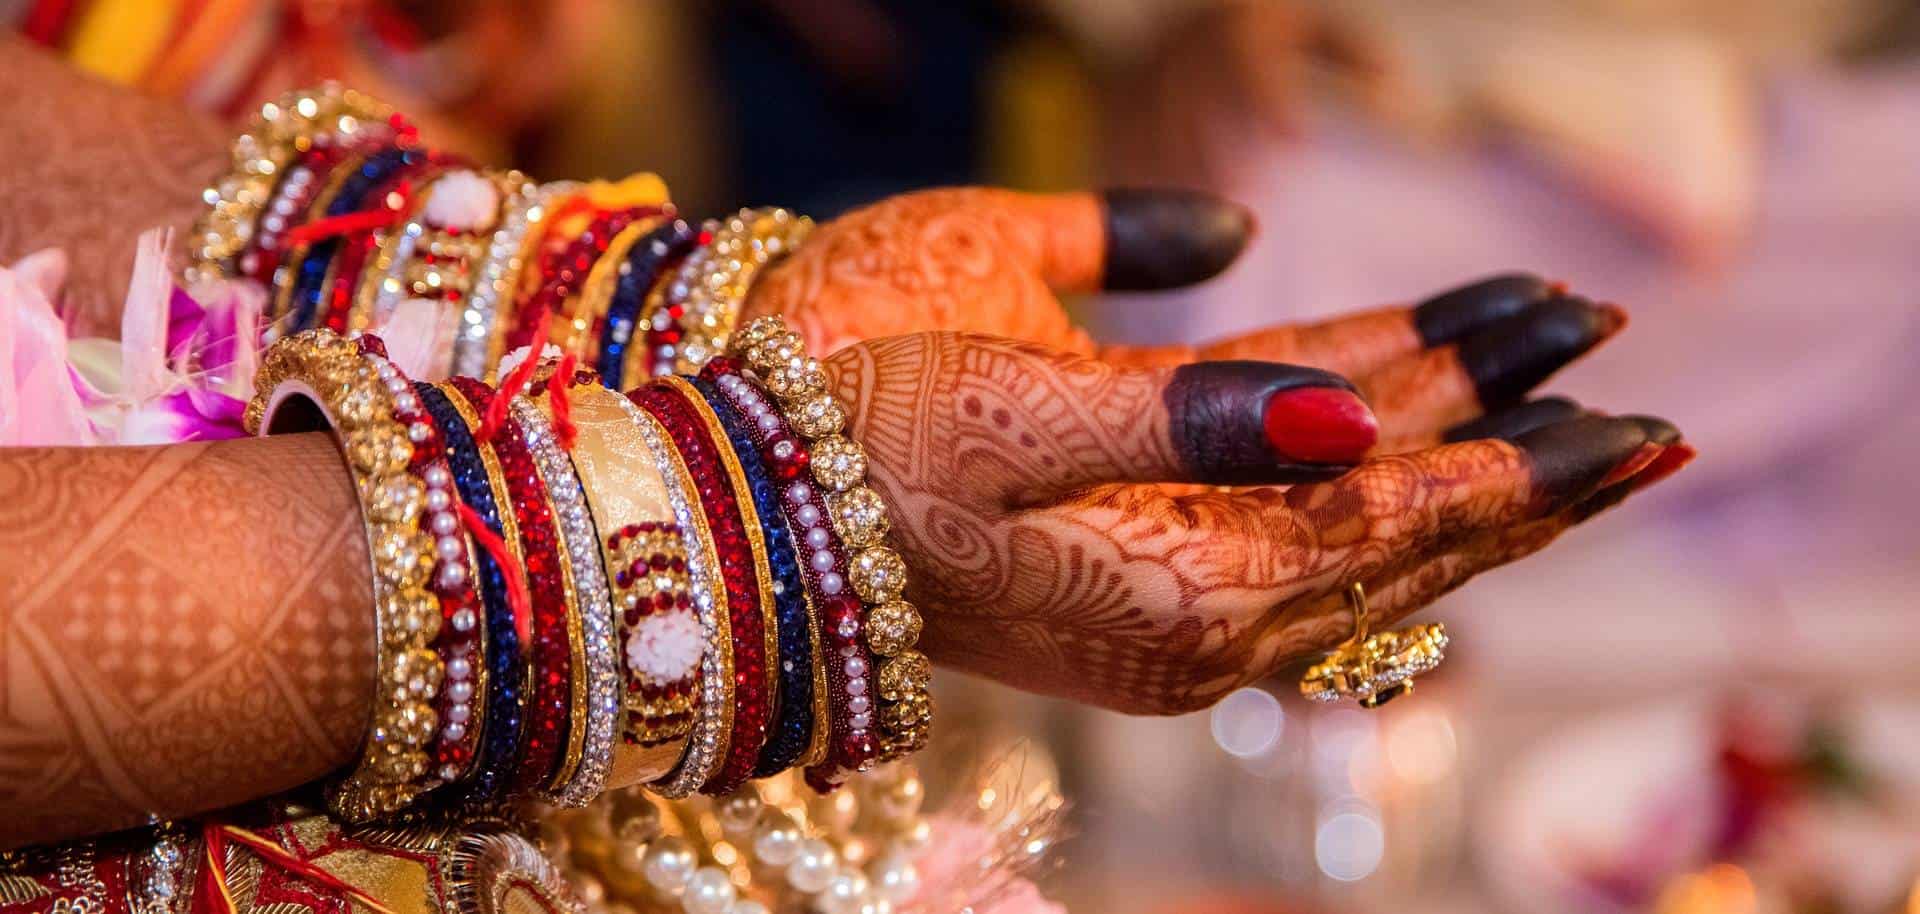 What happens at an Indian wedding?